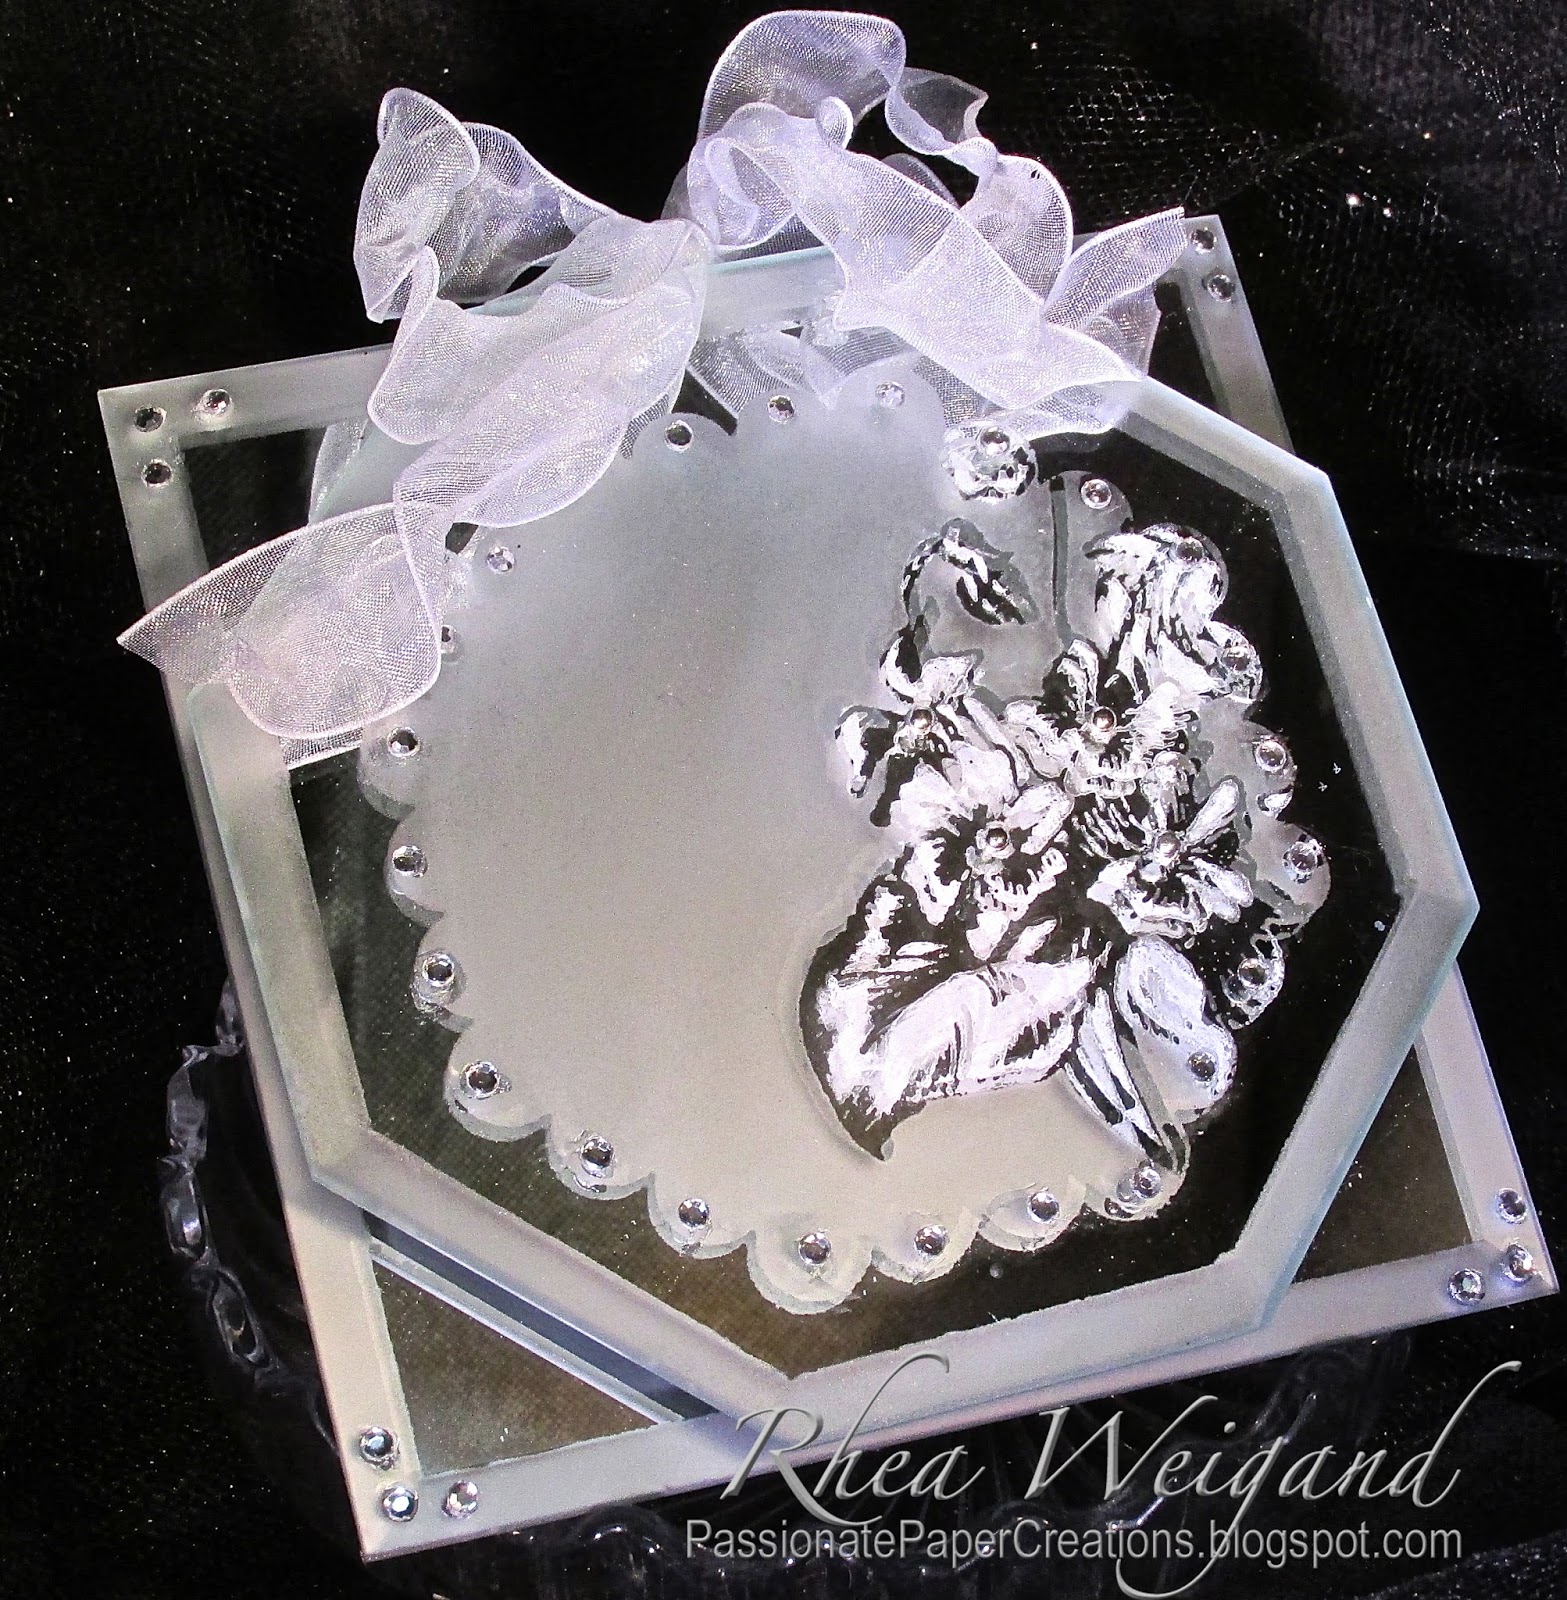 Passionate Paper Creations: Armour Etch Glass Etching Cream with